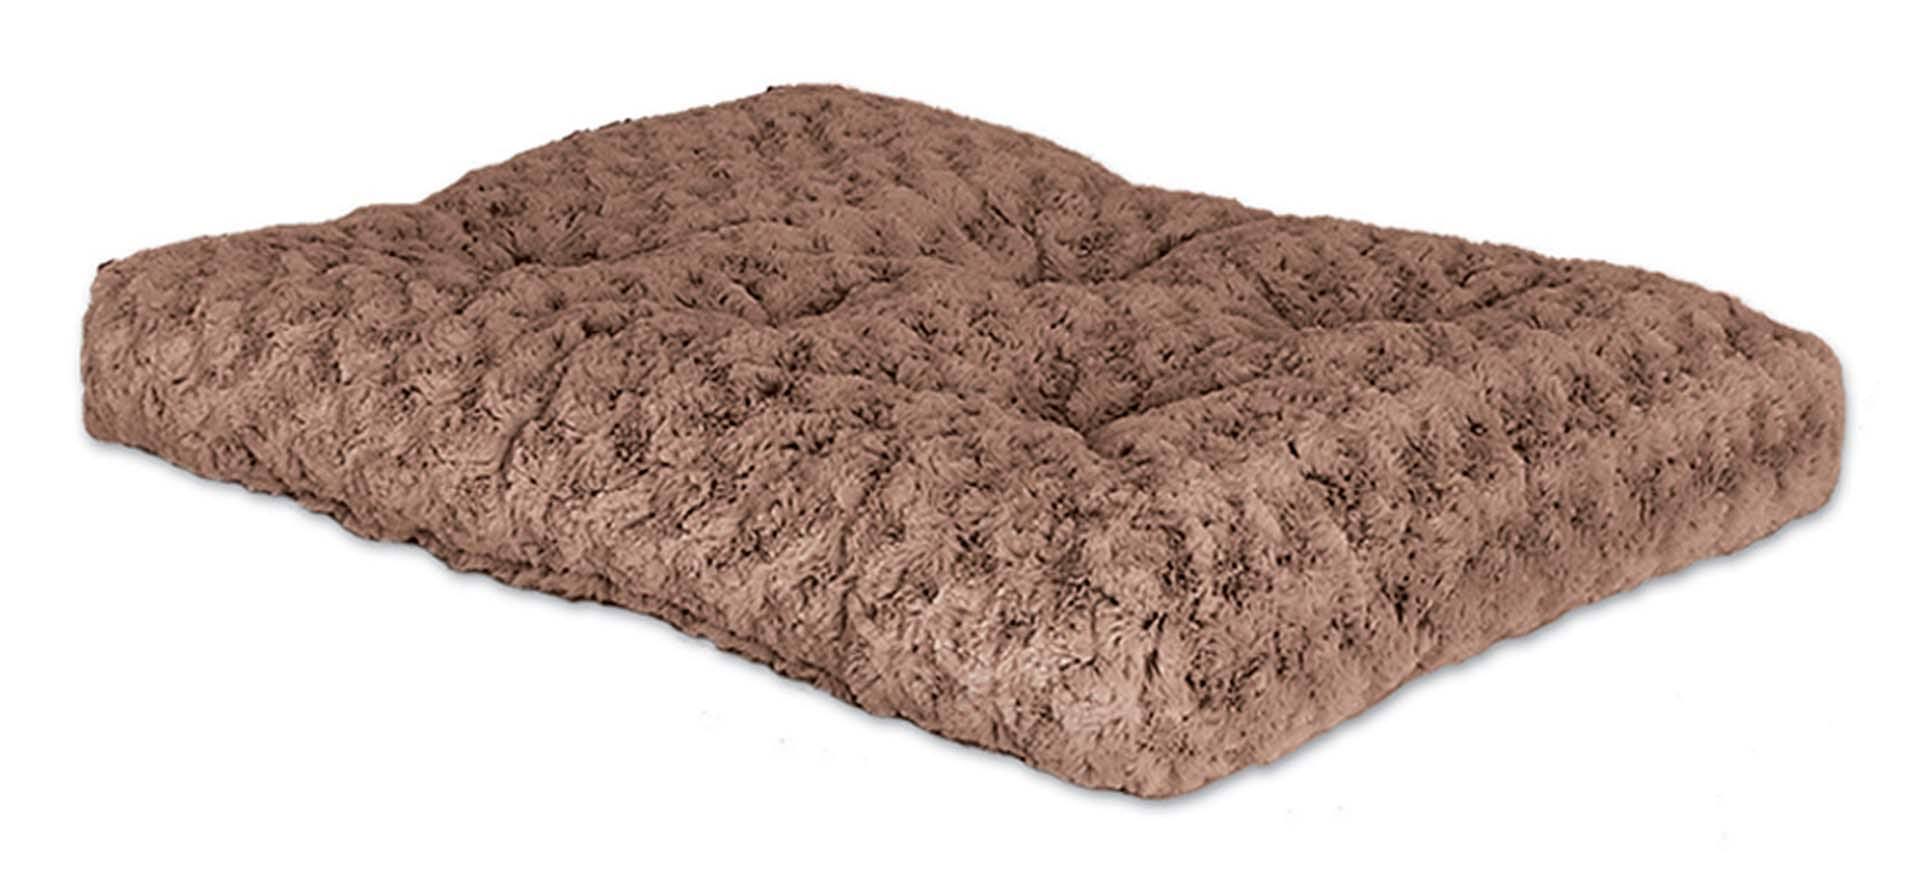 MidWest Quiet Time Deluxe Ombré Swirl Pet Bed - X-Small, 21" x 12"